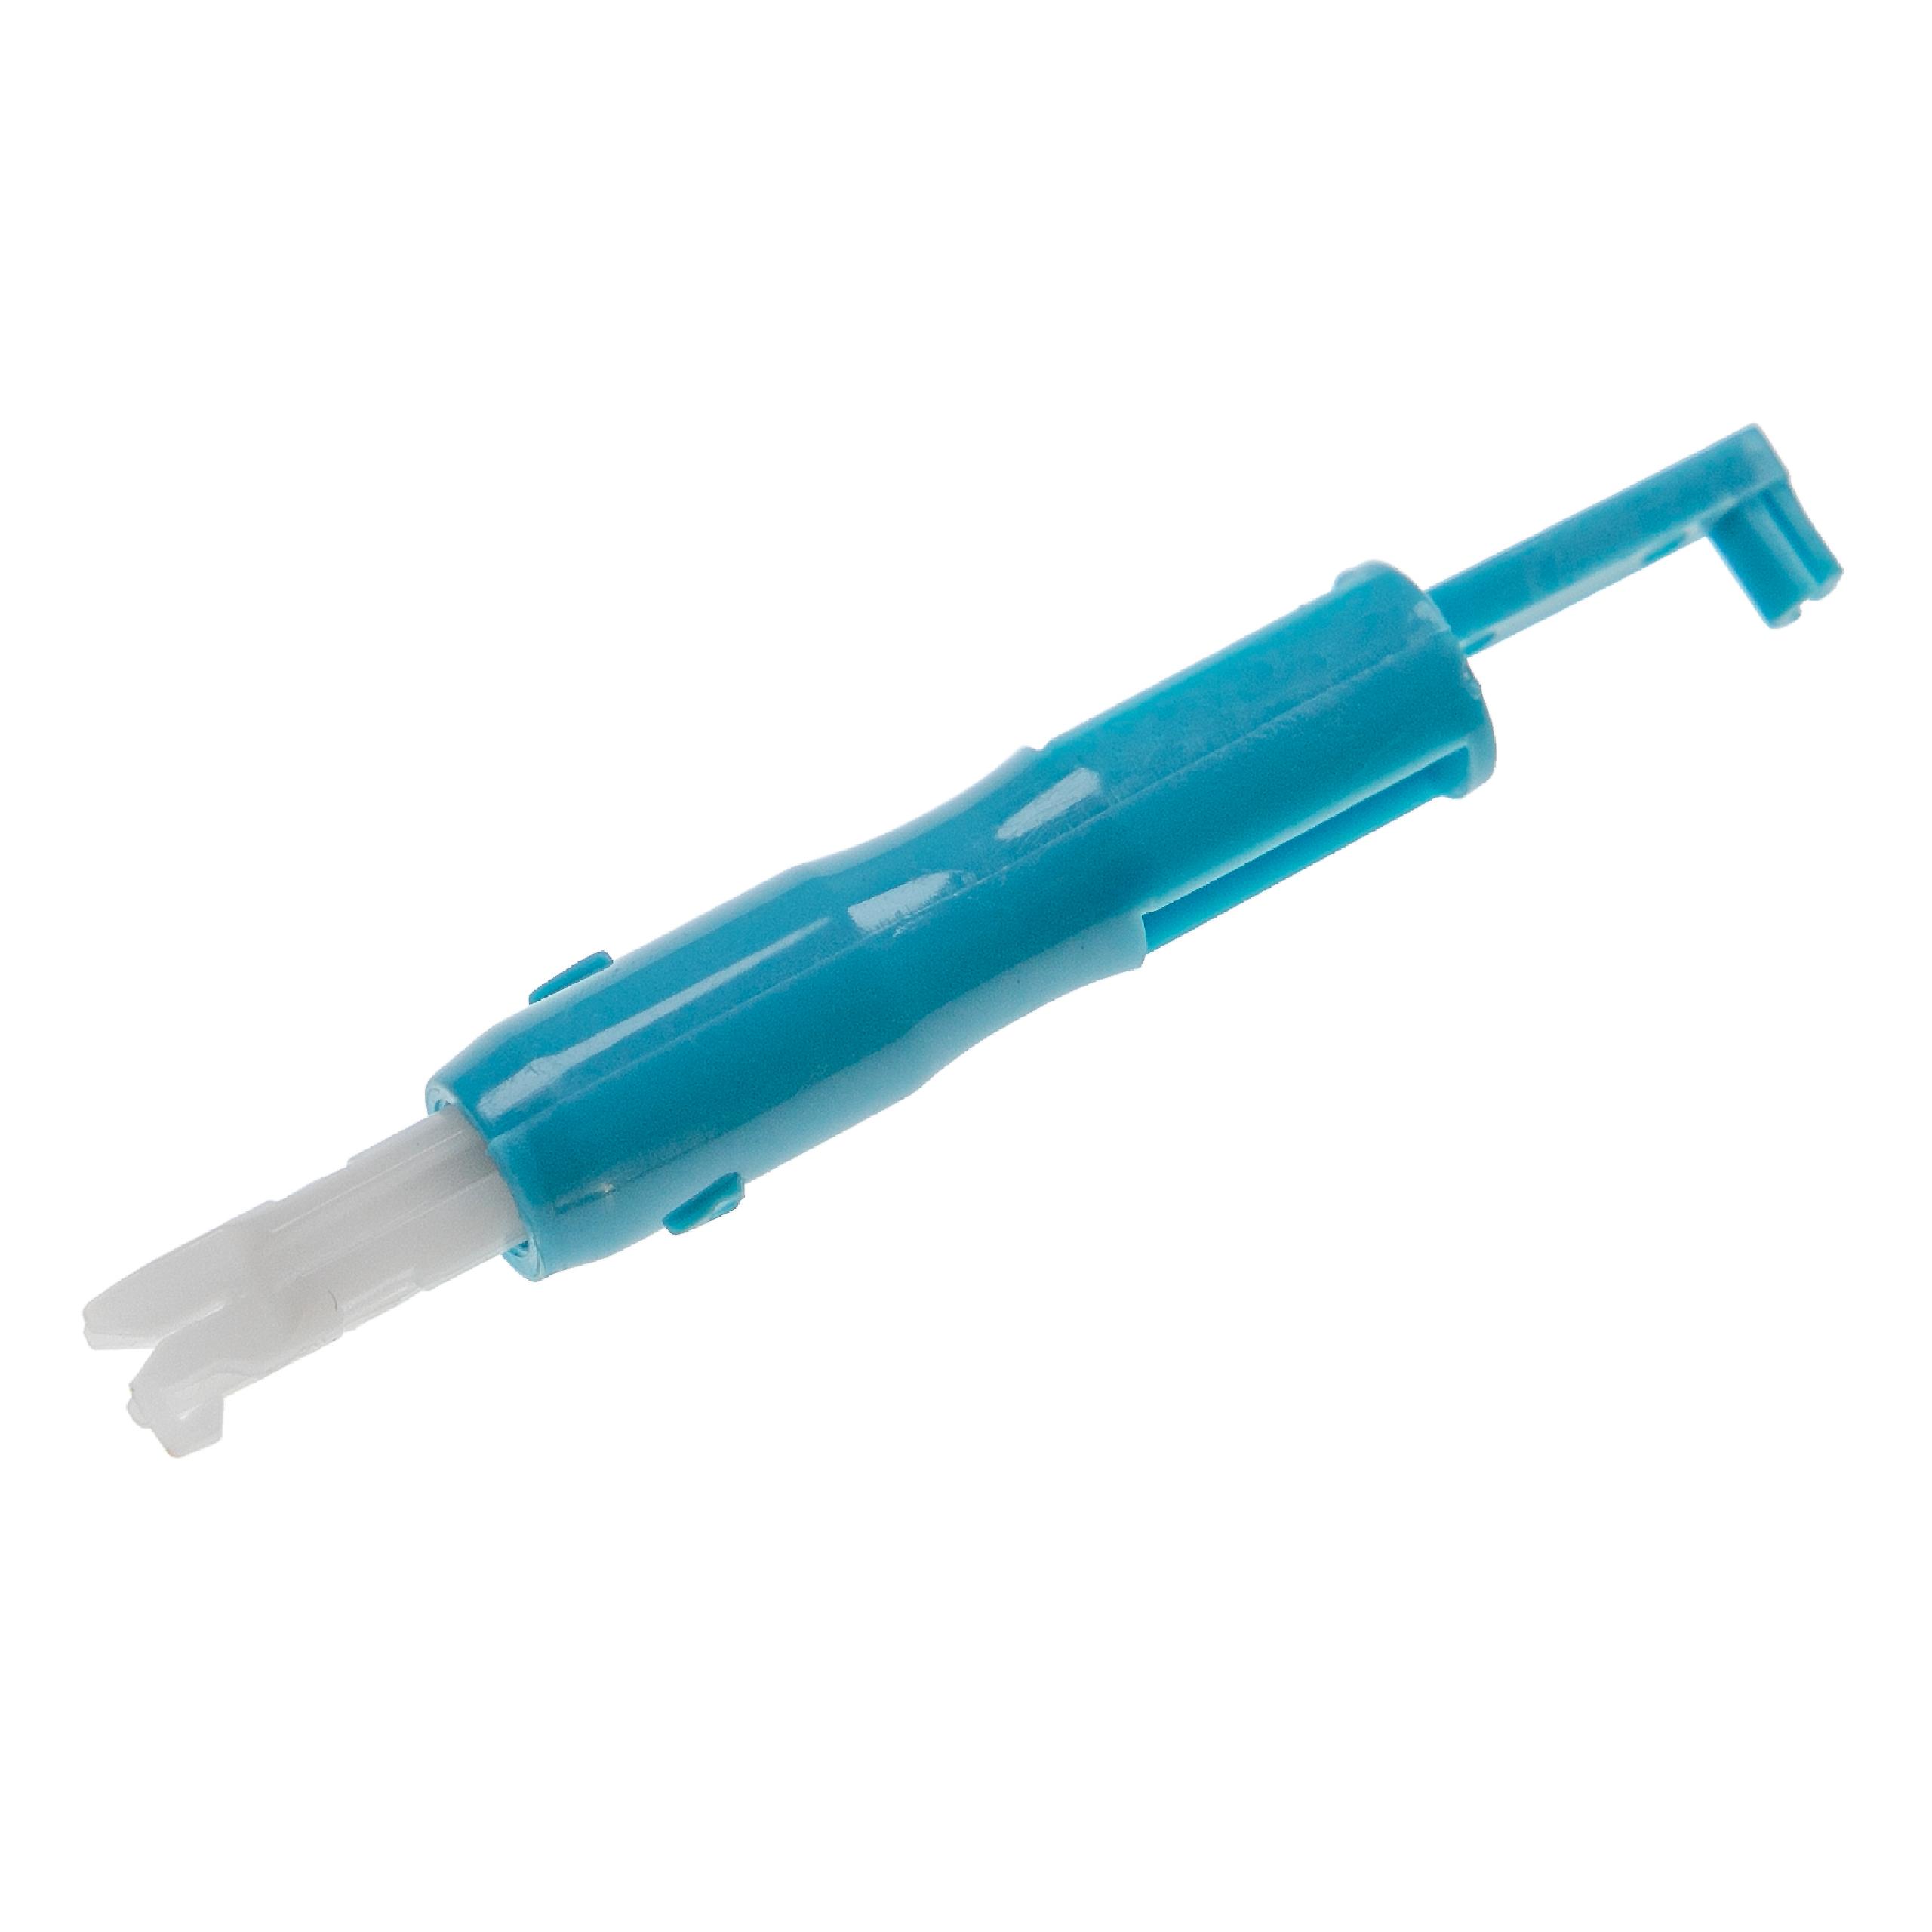 vhbw Needle Threader for Domestic Sewing Machines - Plastic, Length 7 cm Blue